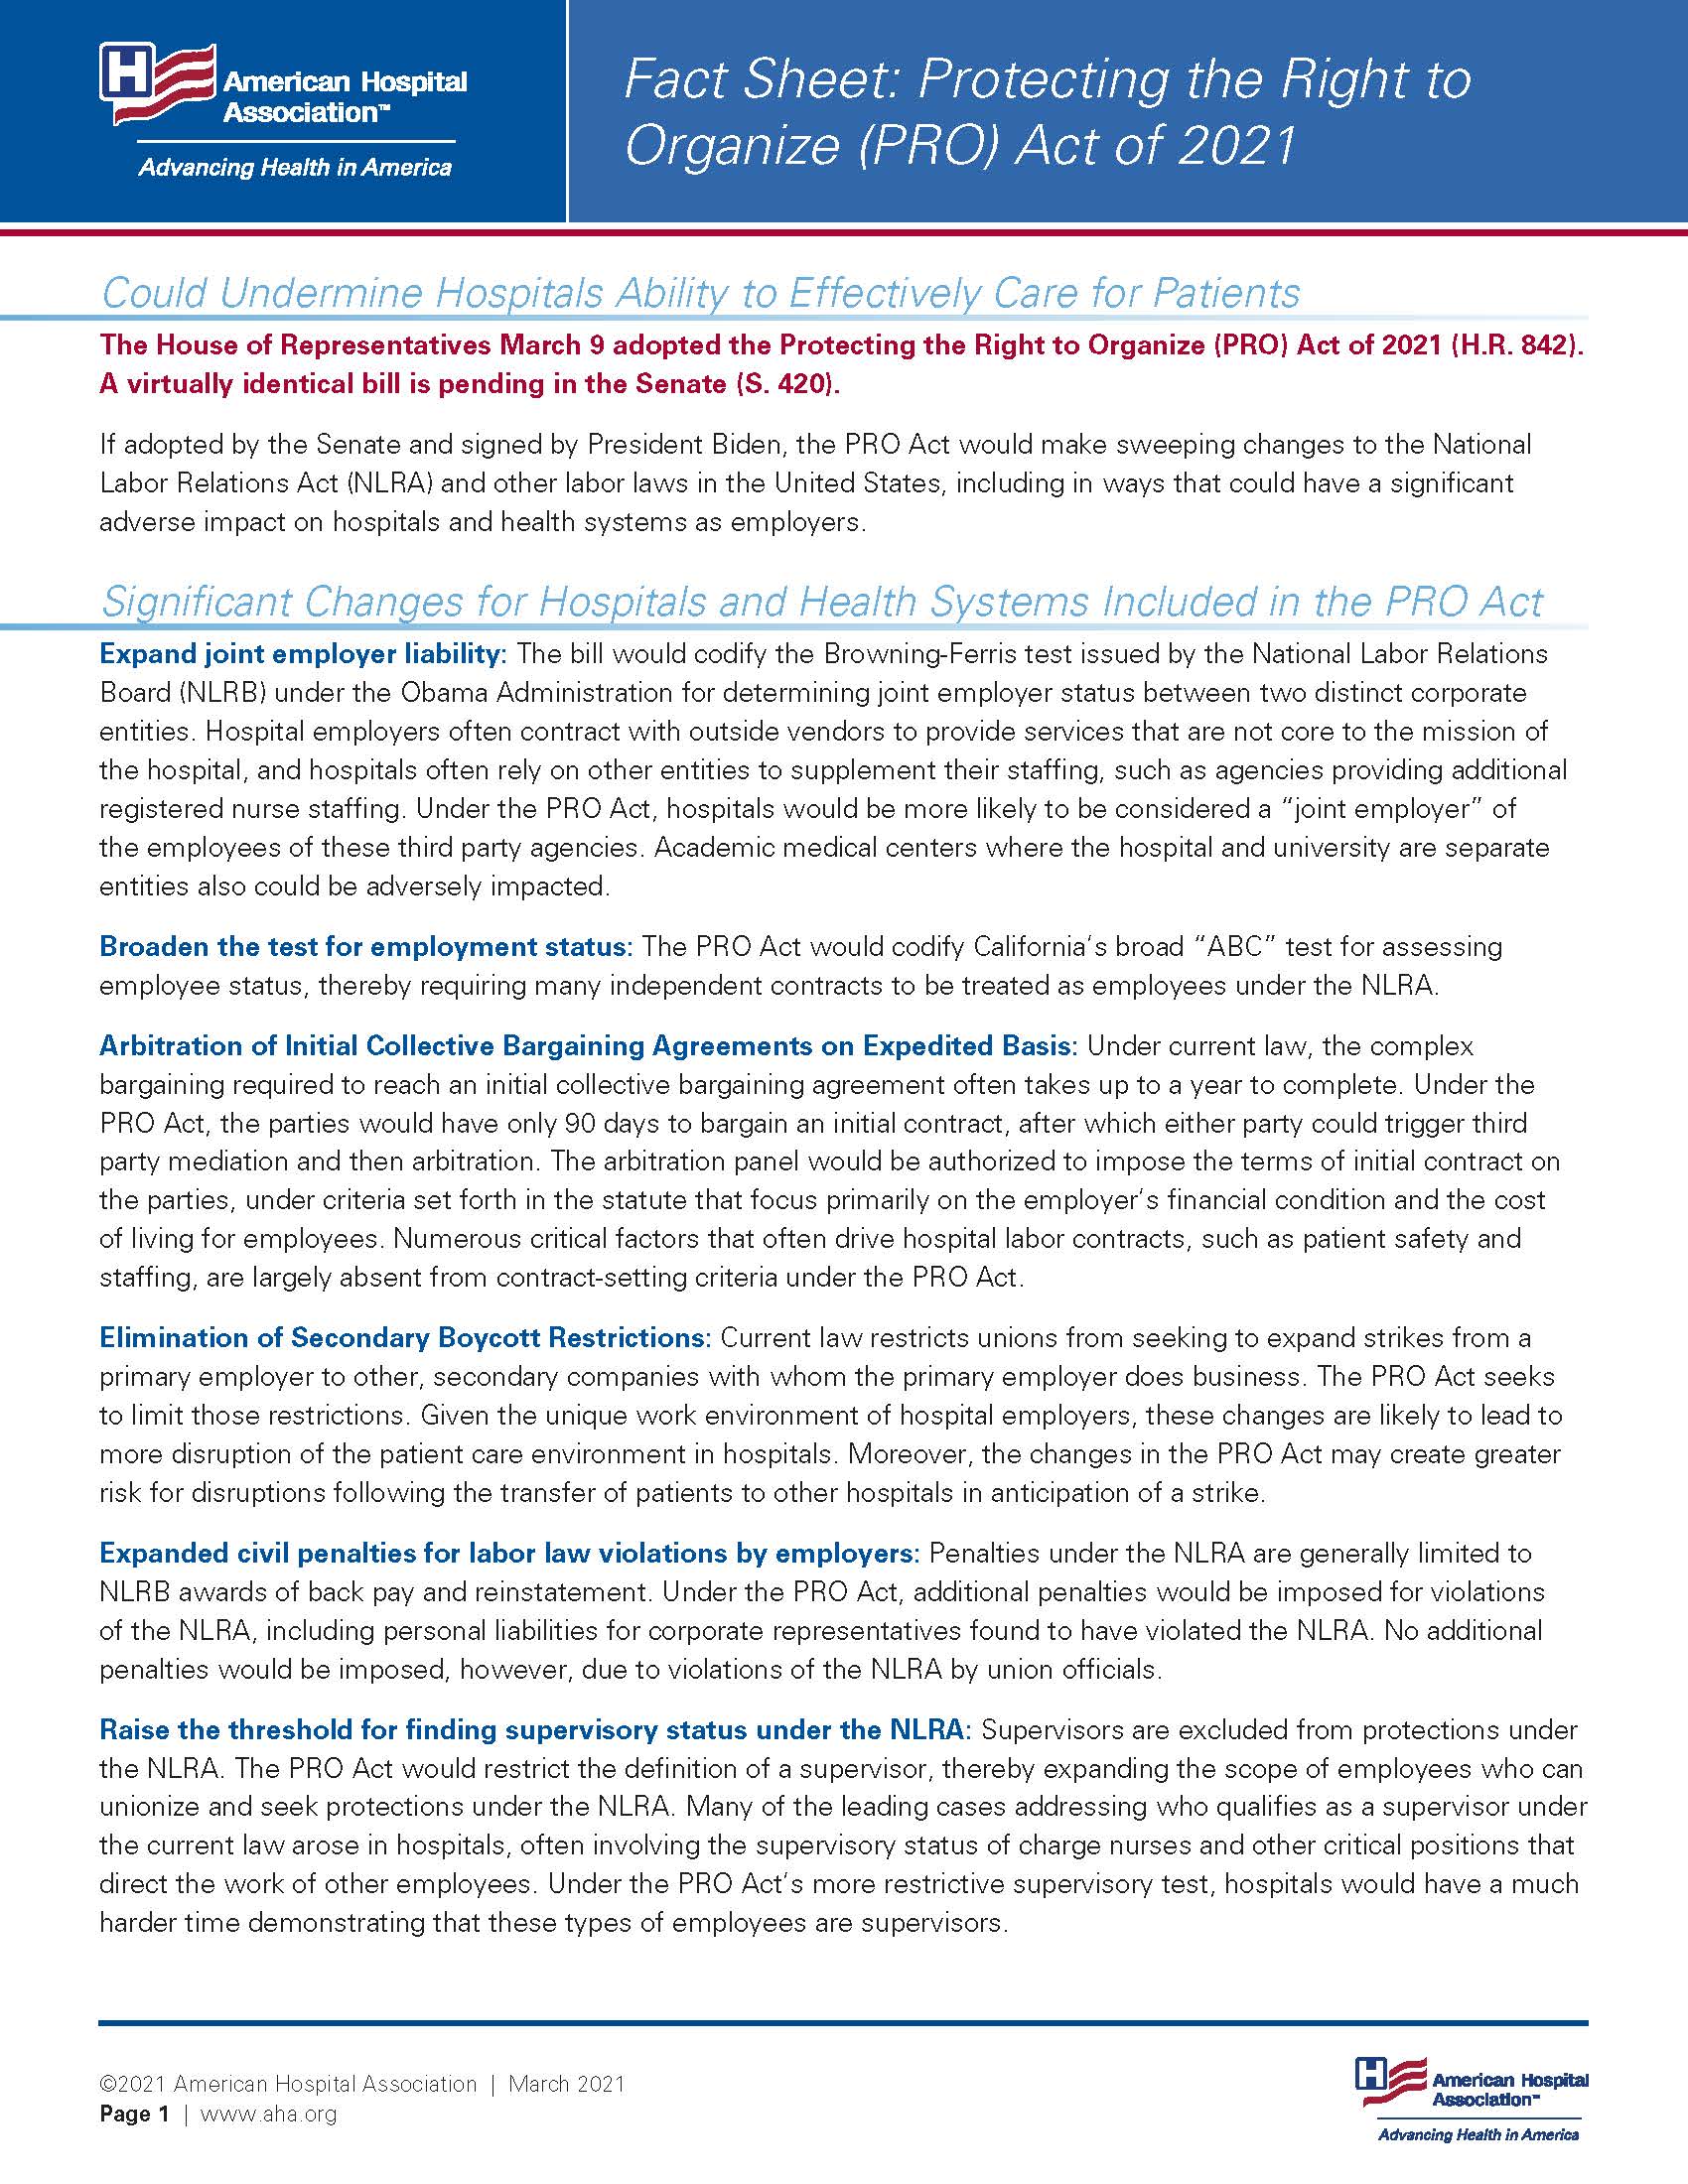 Fact Sheet: Protecting the Right to Organize (PRO) Act of 2021 page 1